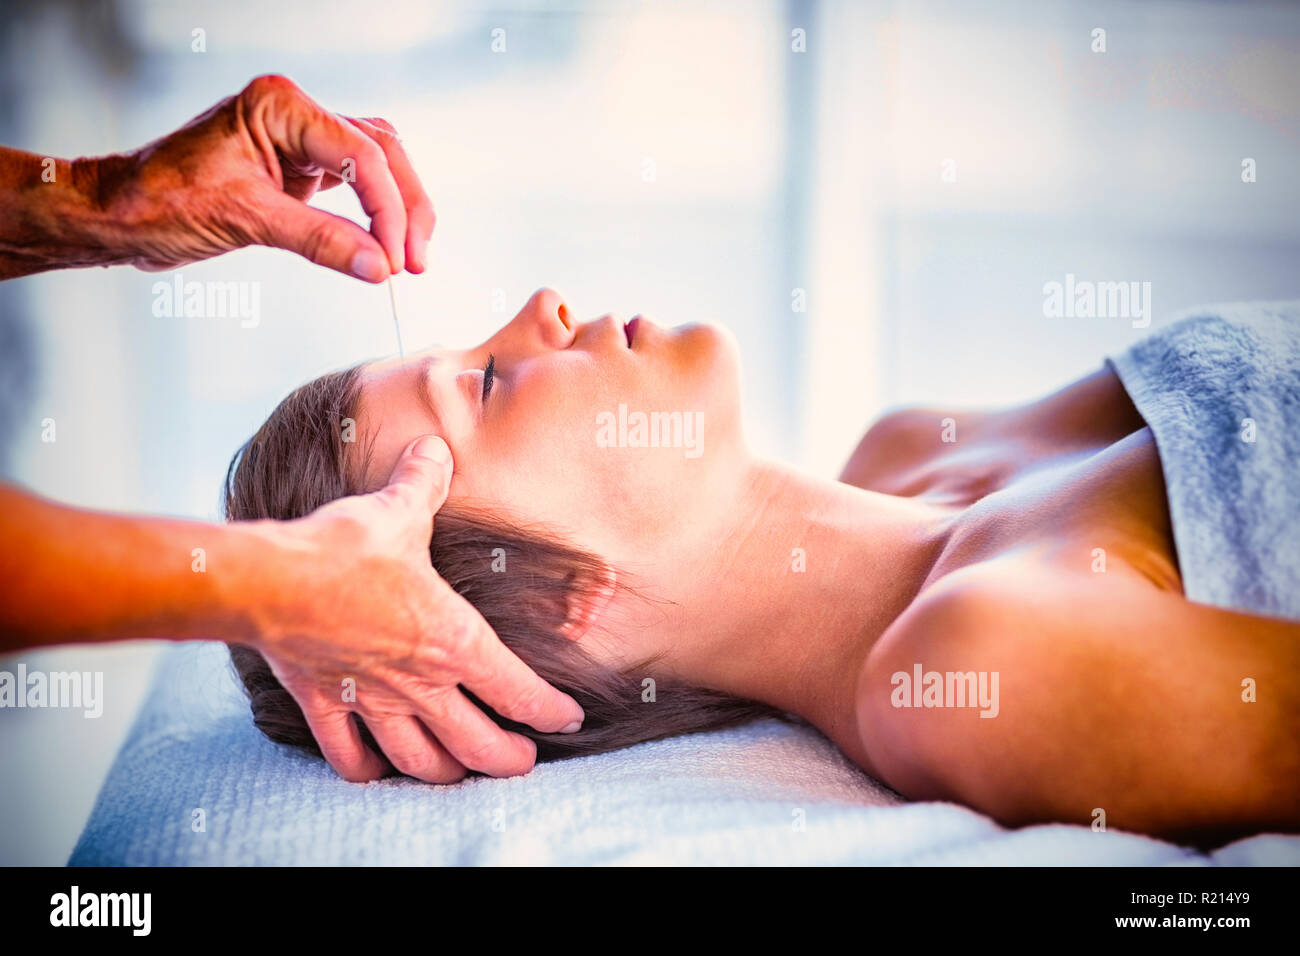 Woman receiving acupuncture treatment Stock Photo